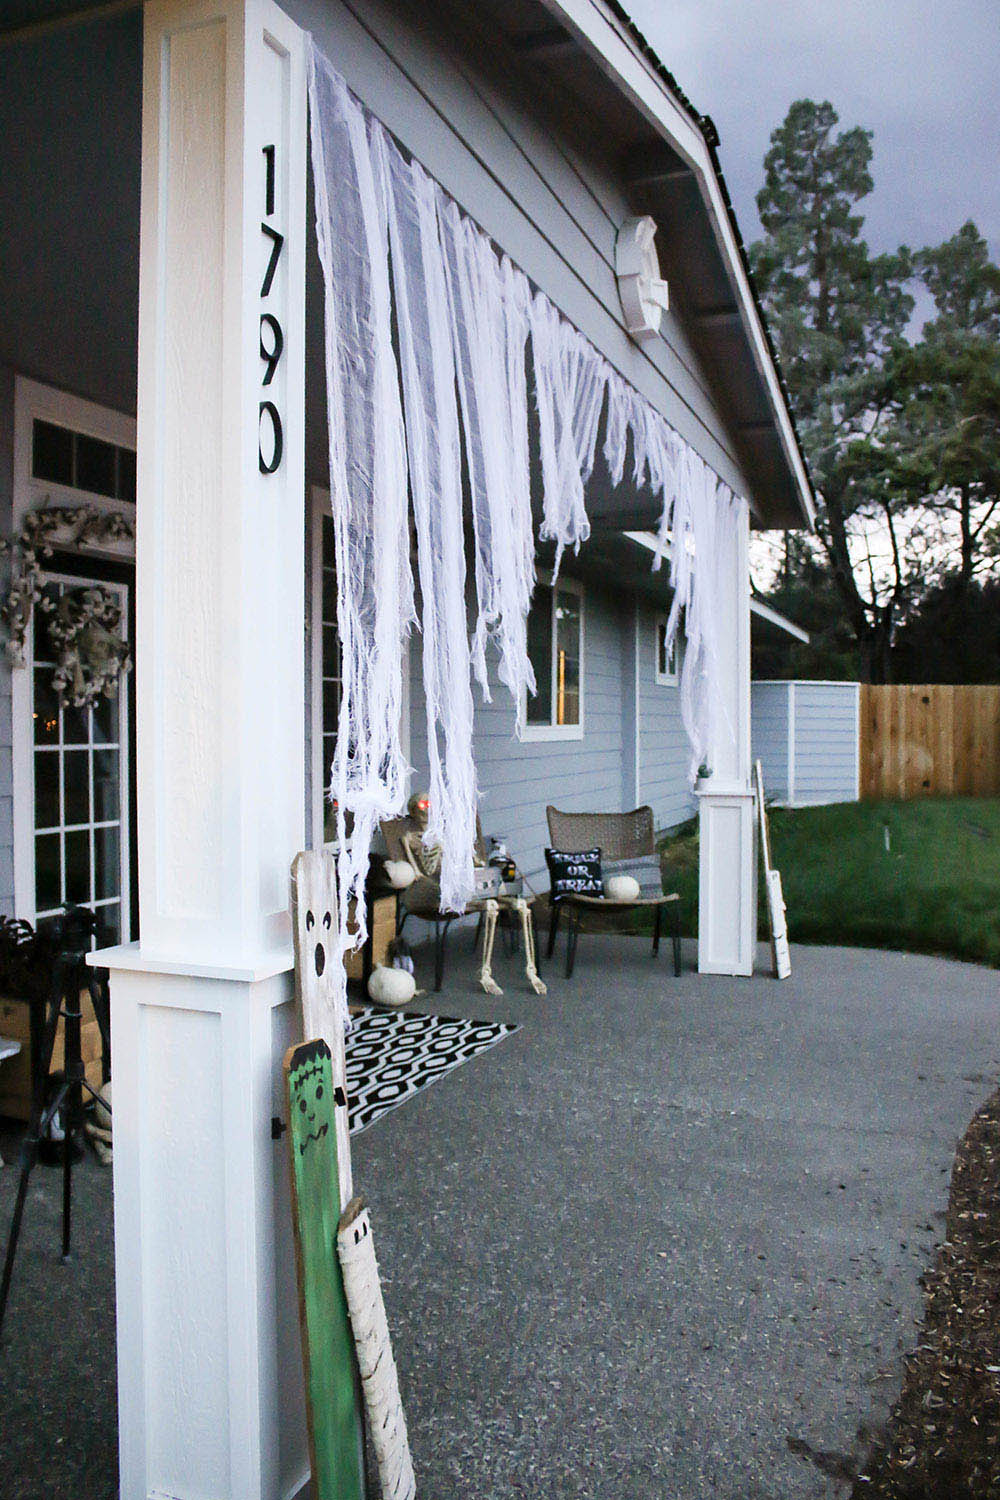 A front porch decorated with ripped curtains made from cheesecloth.